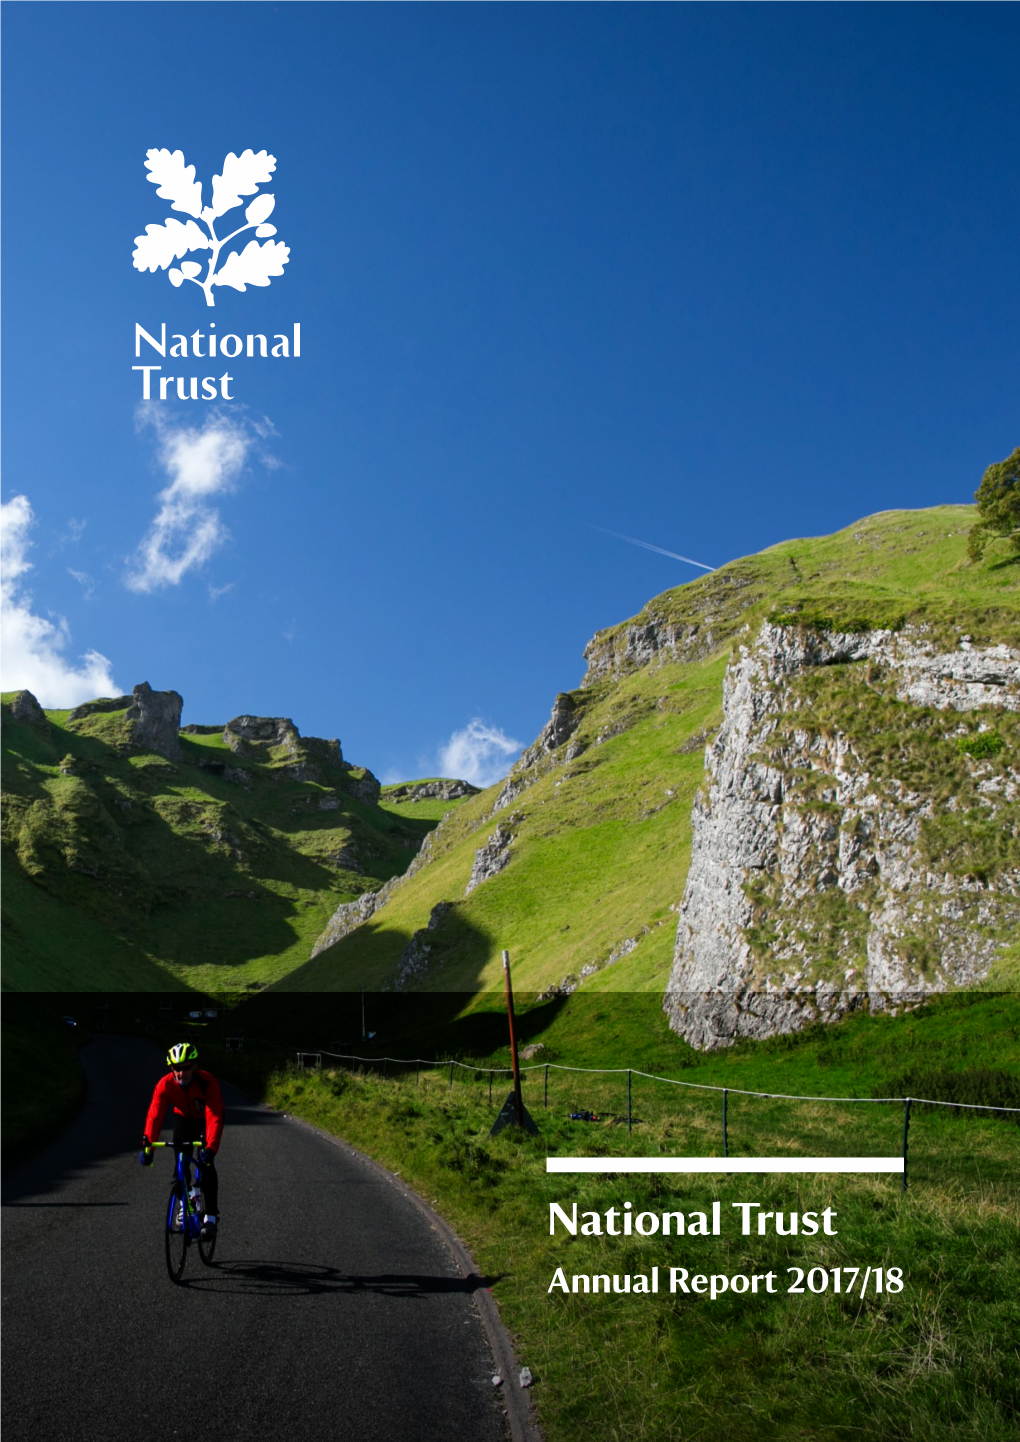 National Trust Annual Report 2017/18